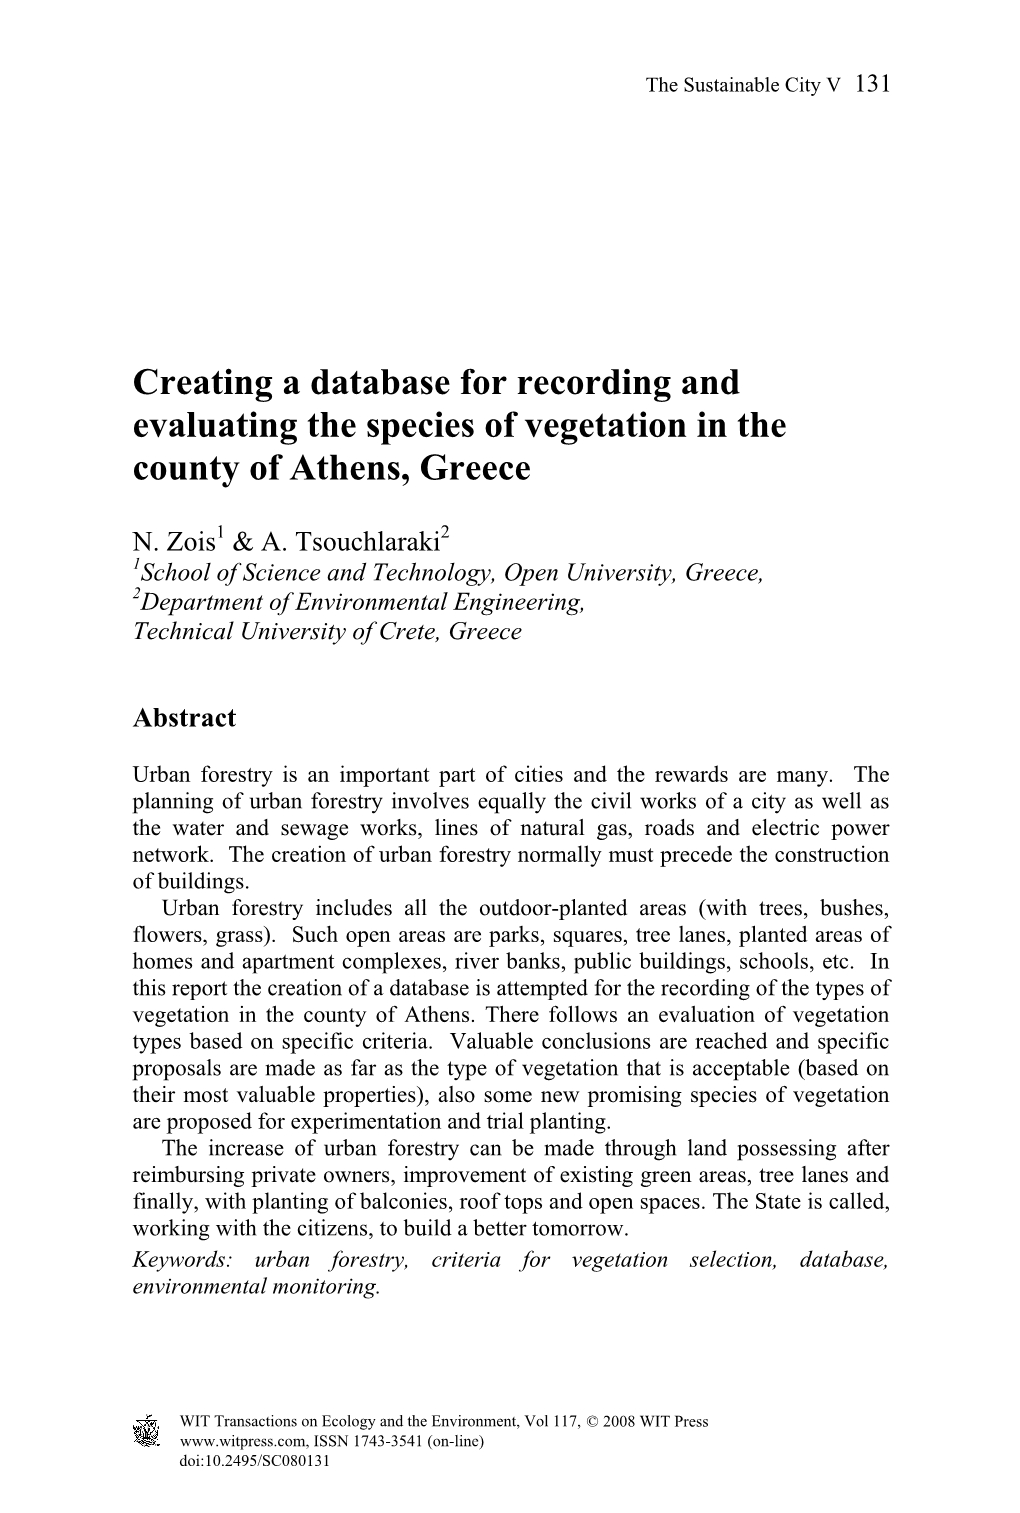 Creating a Database for Recording and Evaluating the Species of Vegetation in the County of Athens, Greece